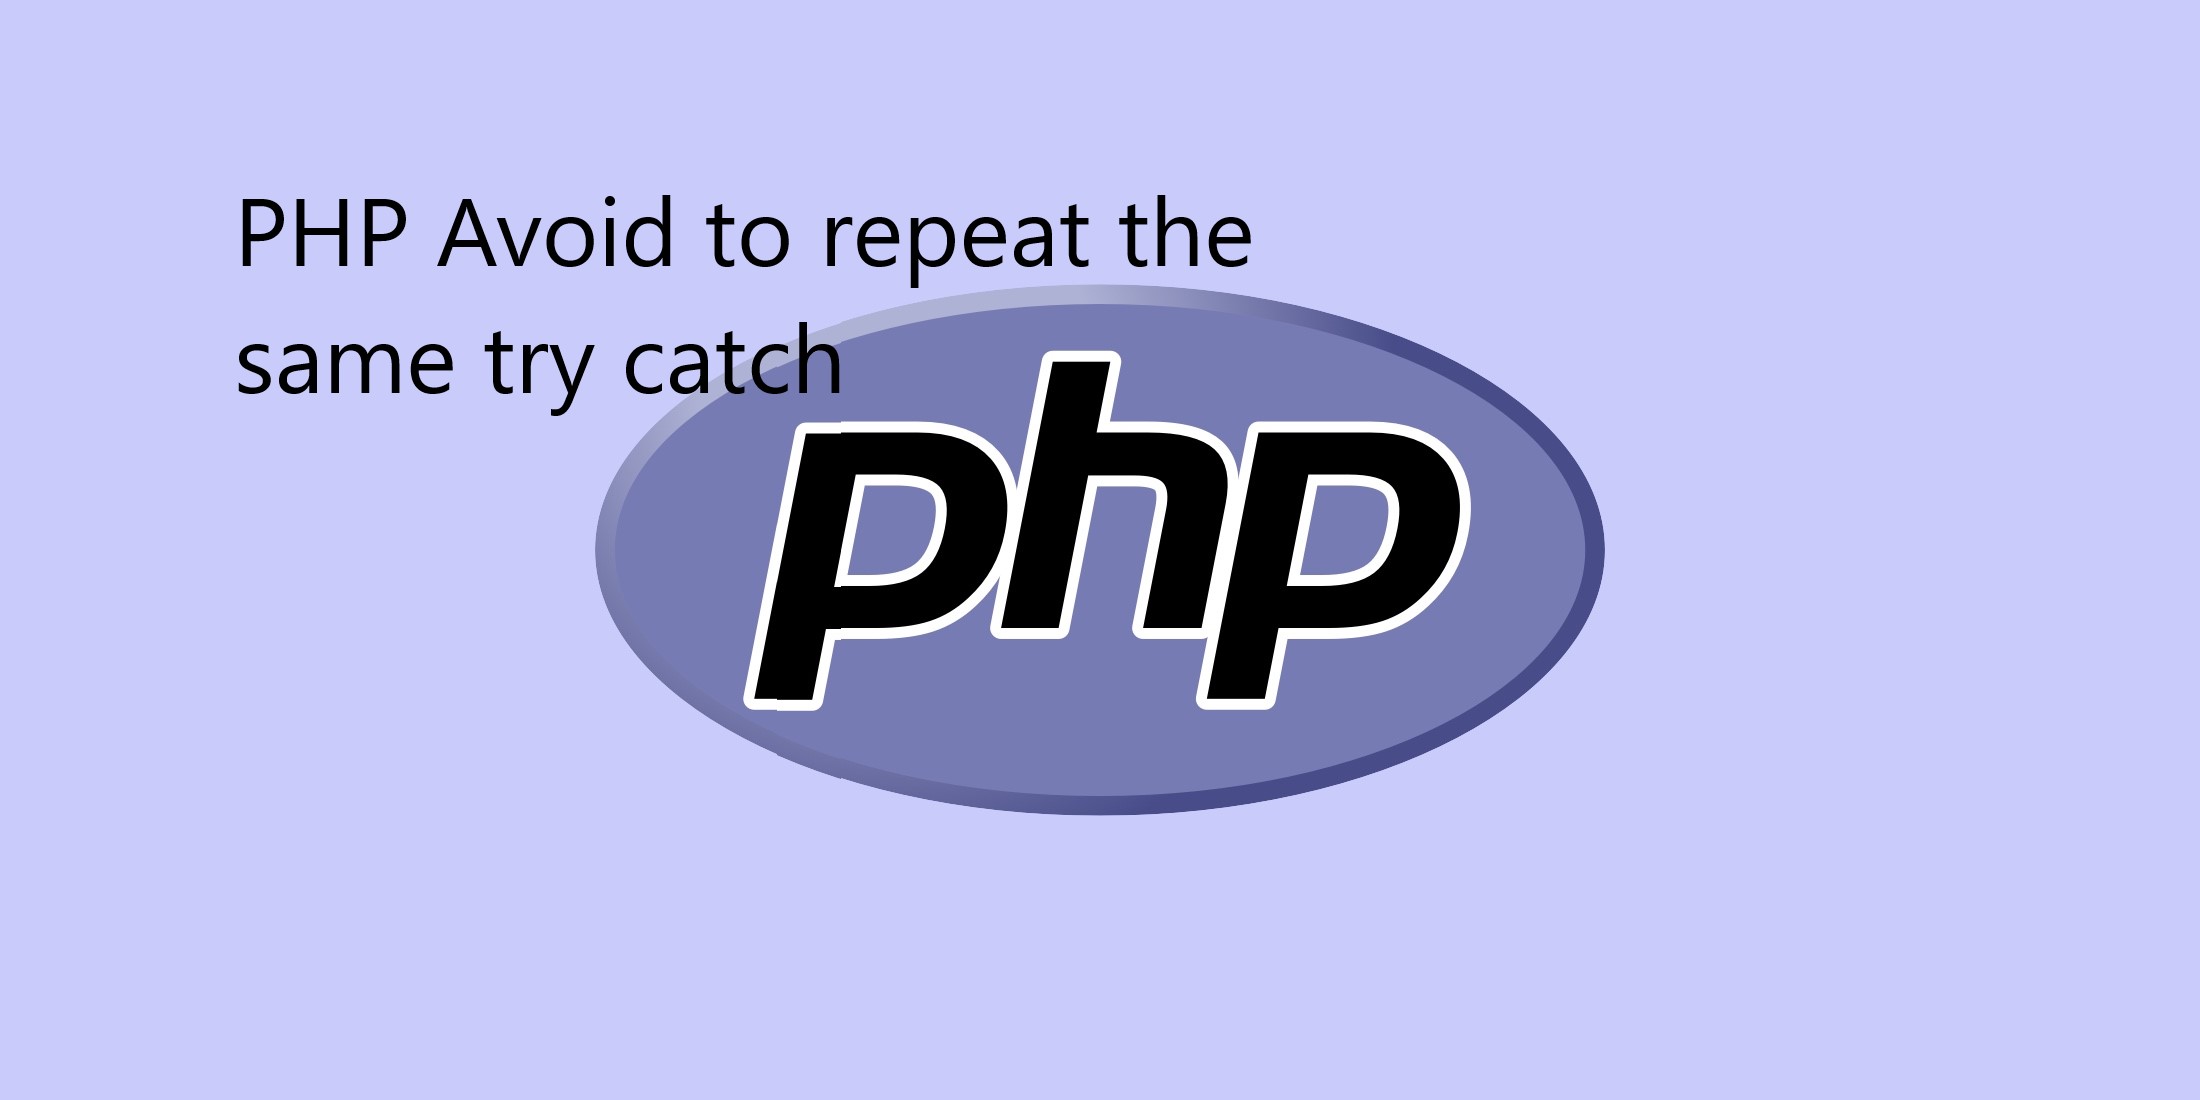 PHP Avoid to repeat the same try catch（PHP避免重复使用相同的try catch）